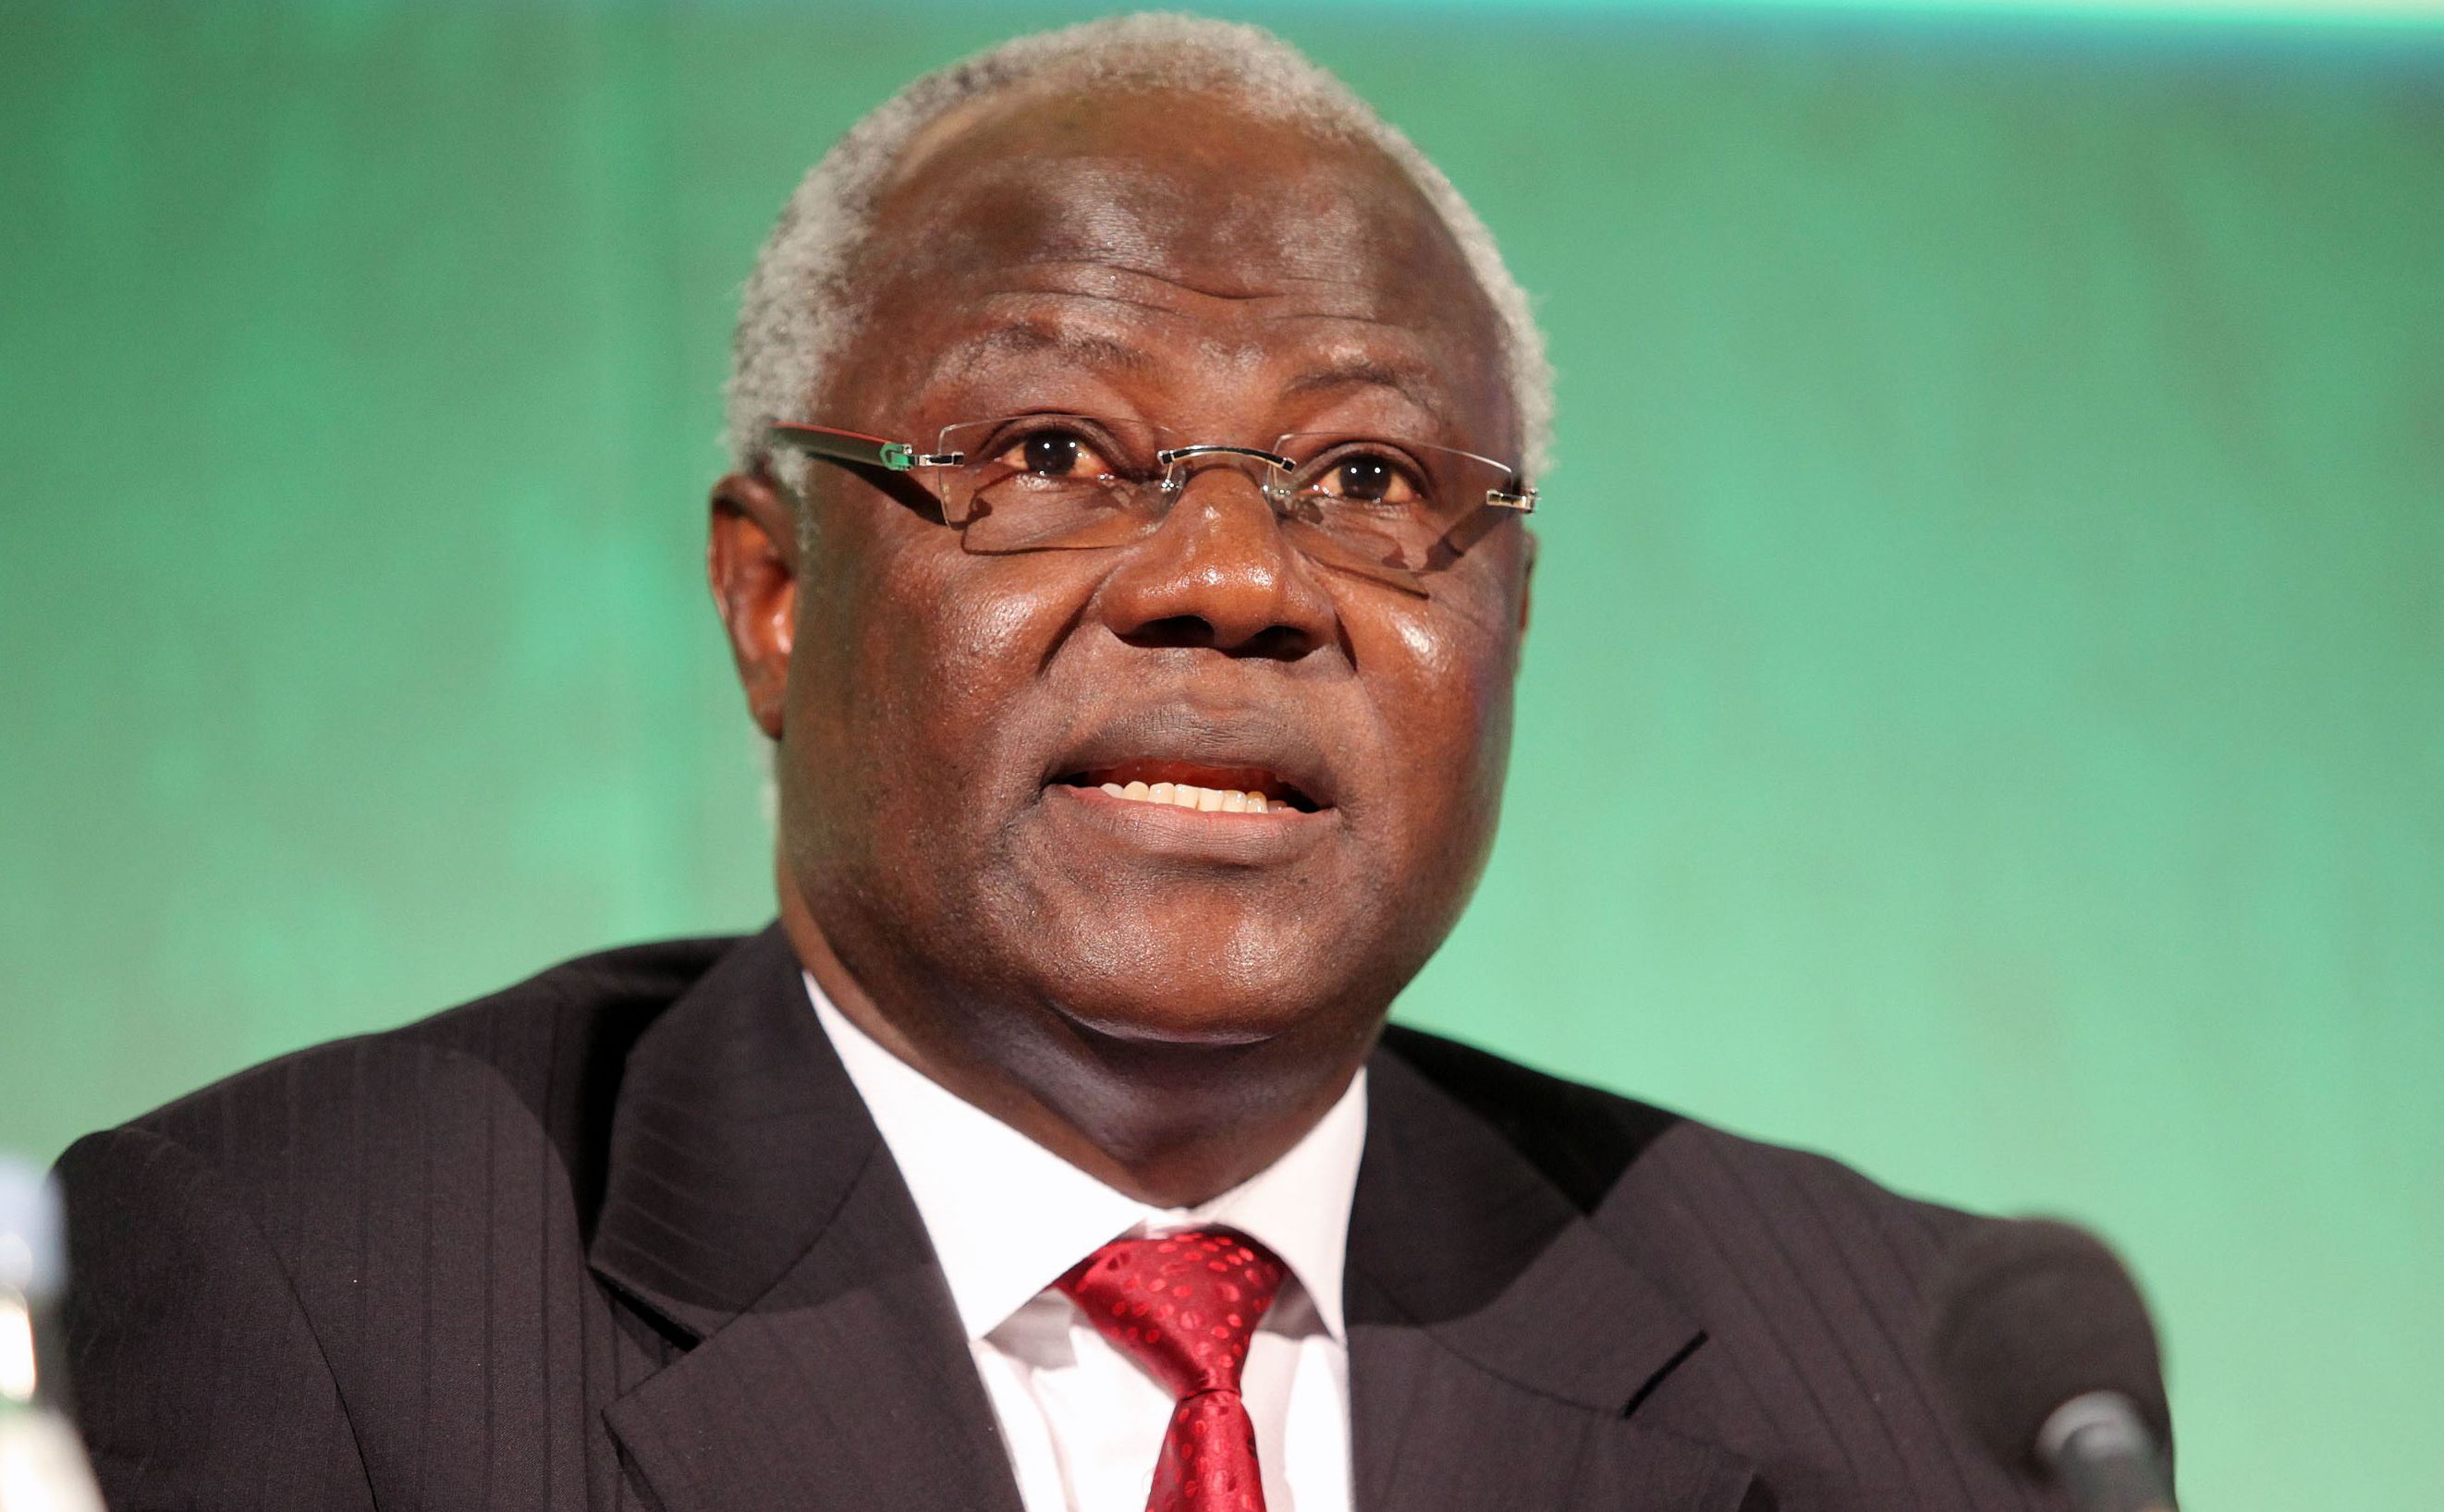 Sierra Leone president Ernest Bai Koroma says the county can transform in the coming decades.